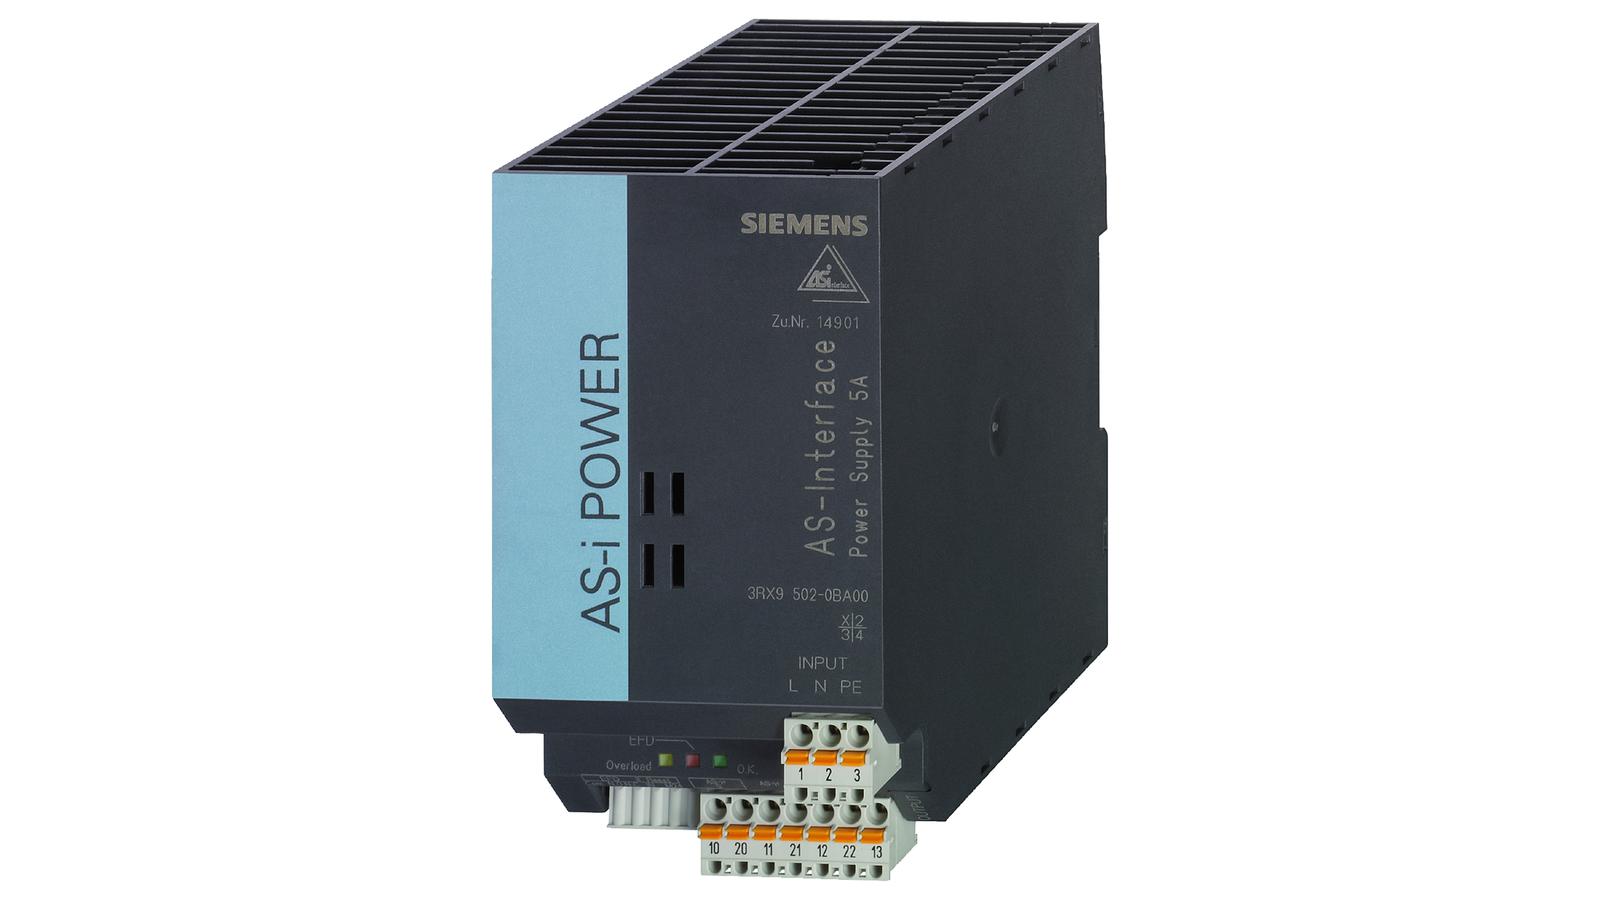 3RX9502-0BA00 KOEED 201-500, 90%, import_2020_10_10_031751, Other, Siemens